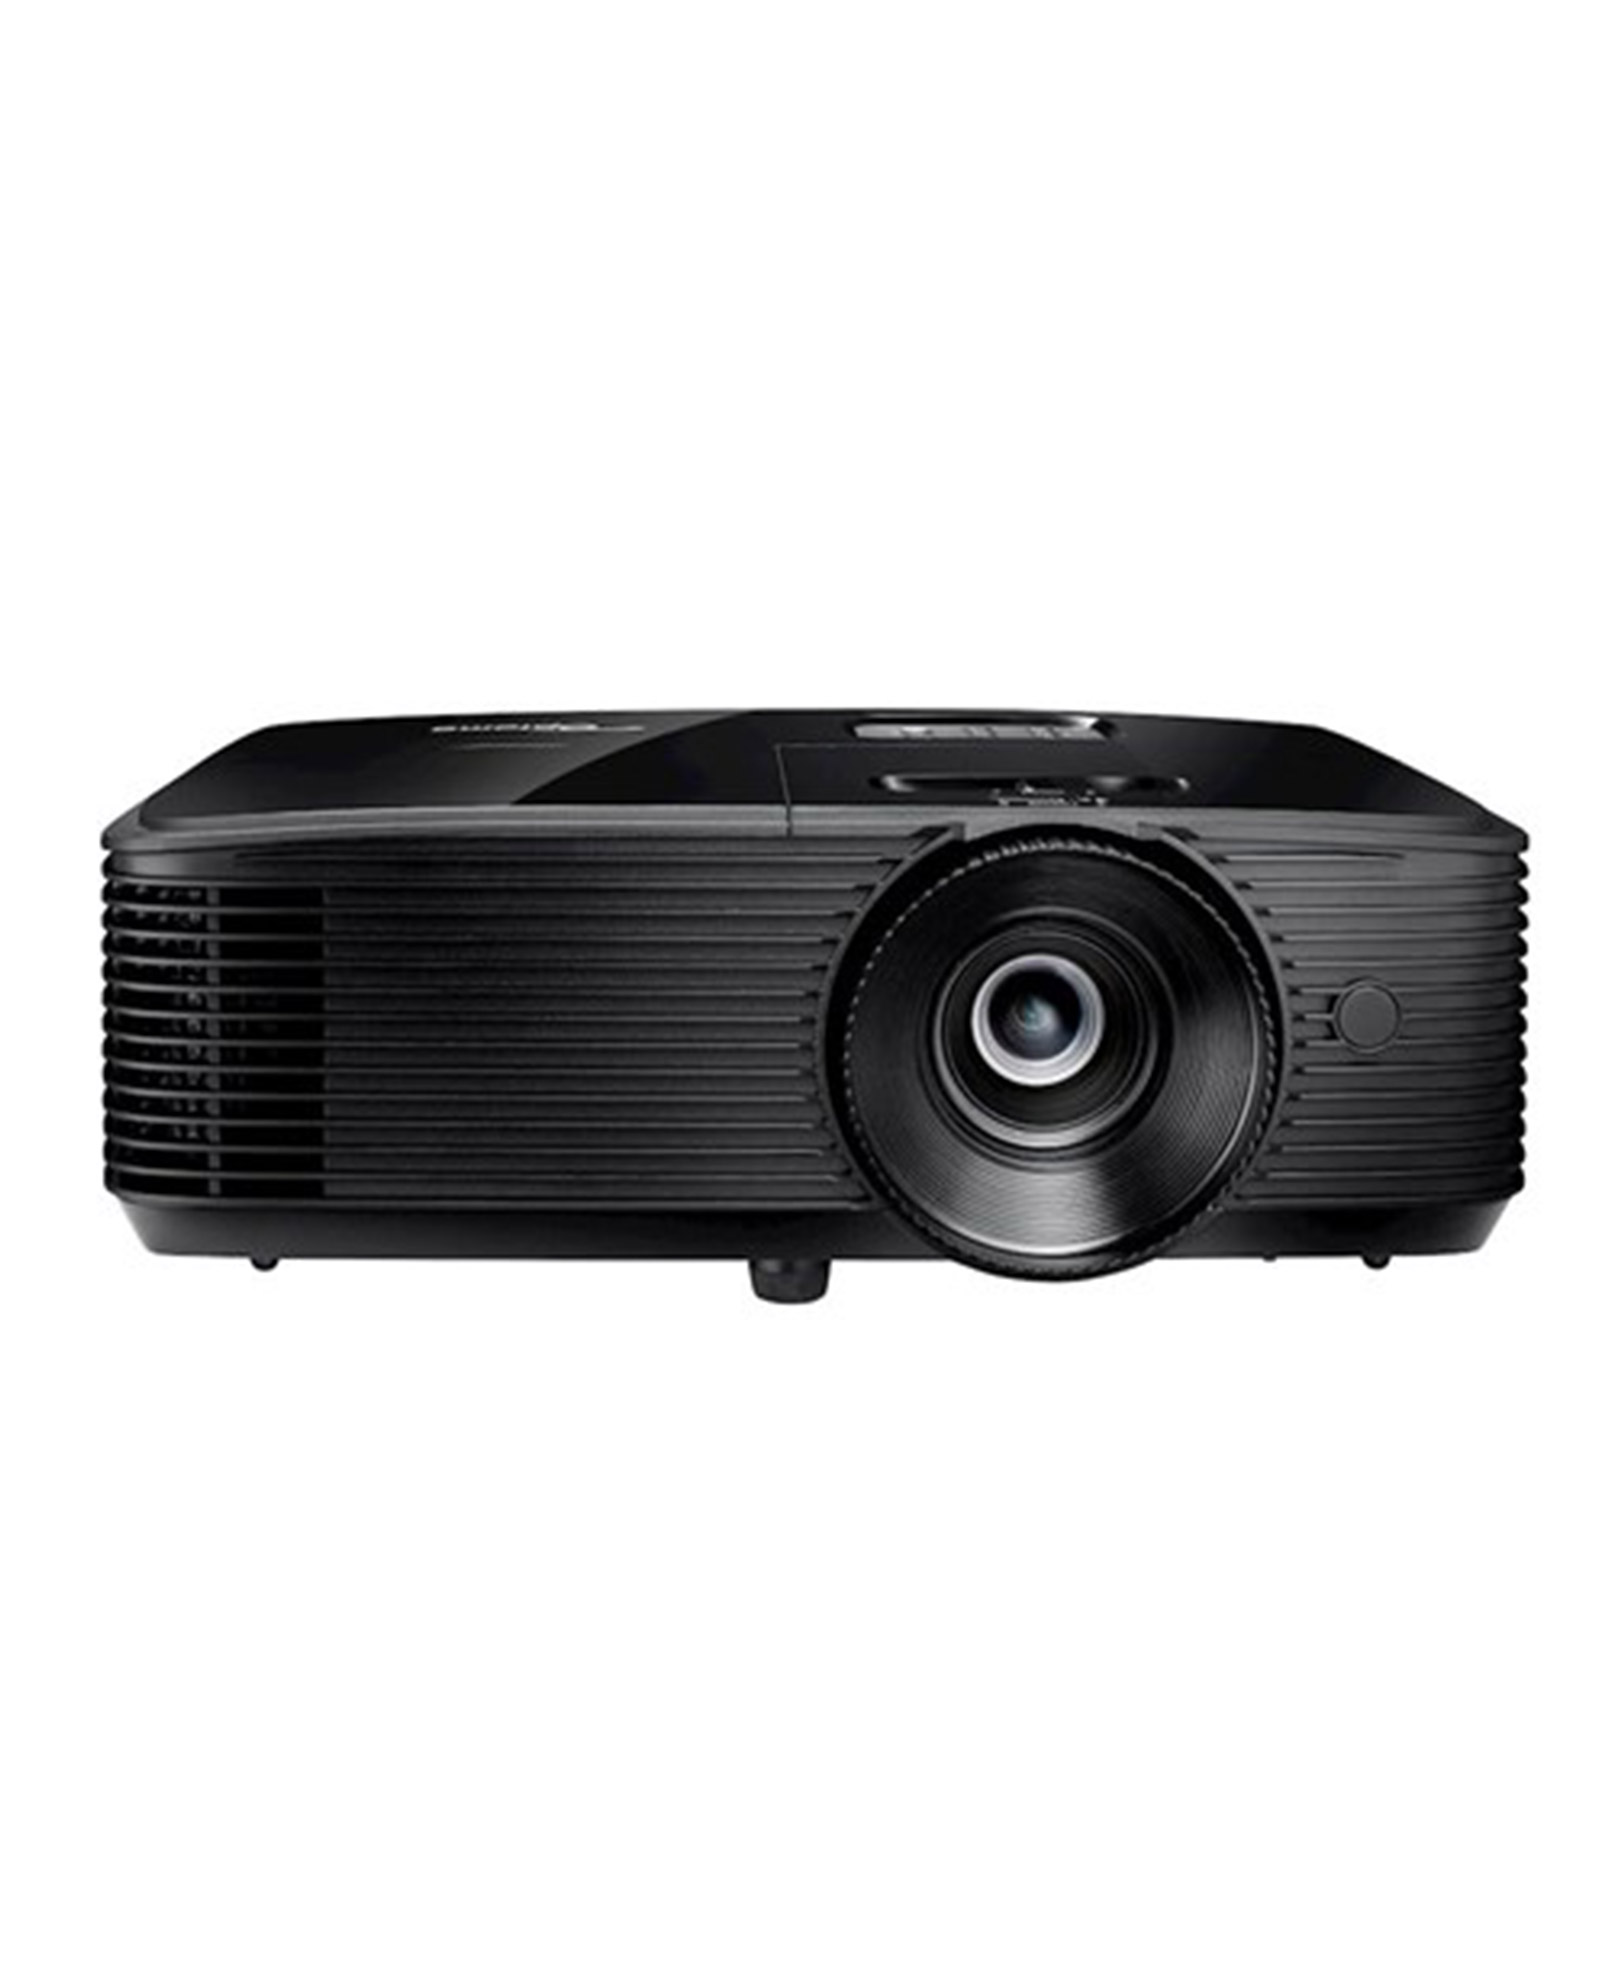 Optoma Hd28e 3800lm 1080p 30000 1 Home Entertainment Projector